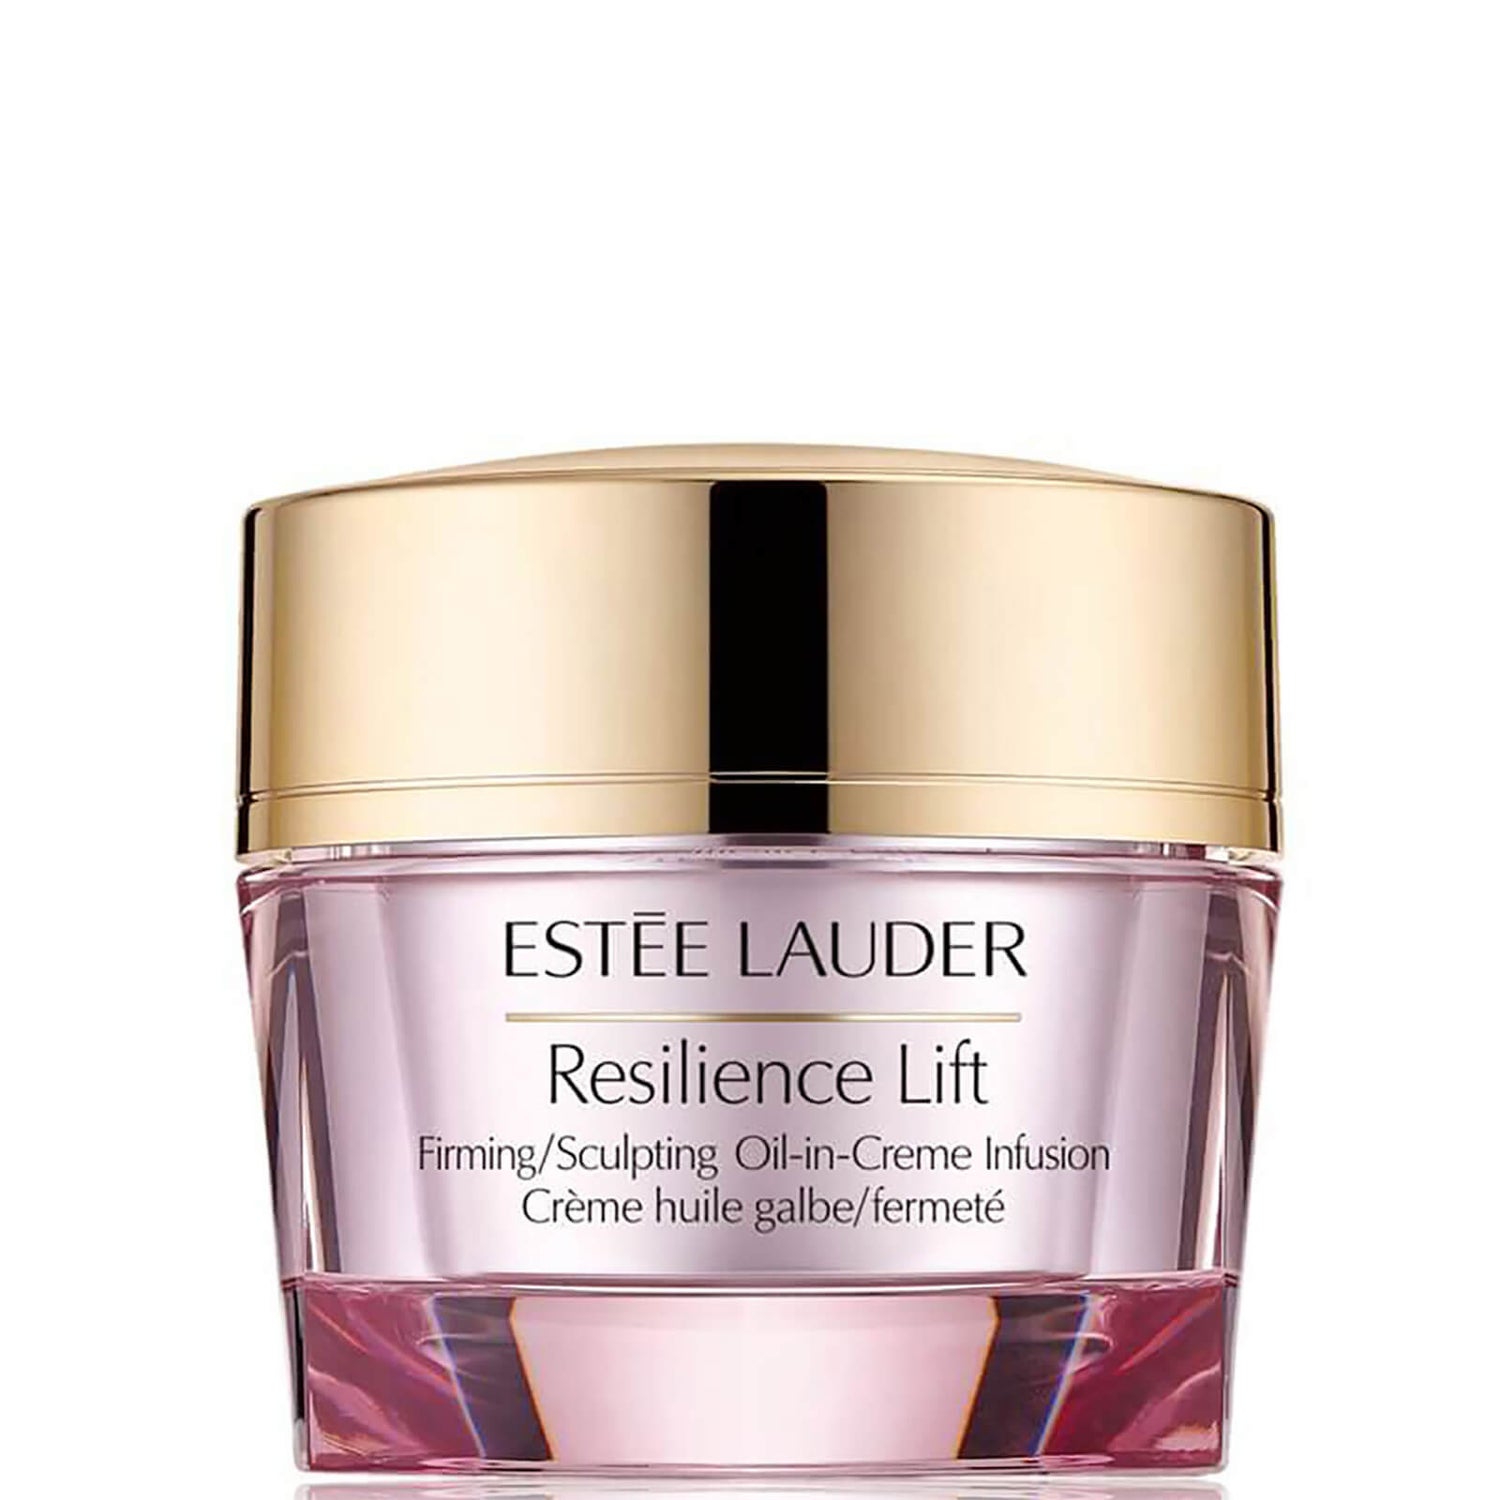 Estée Lauder Resilience Lift Firming/Sculpting Oil-in-Creme Infusion (50ml)